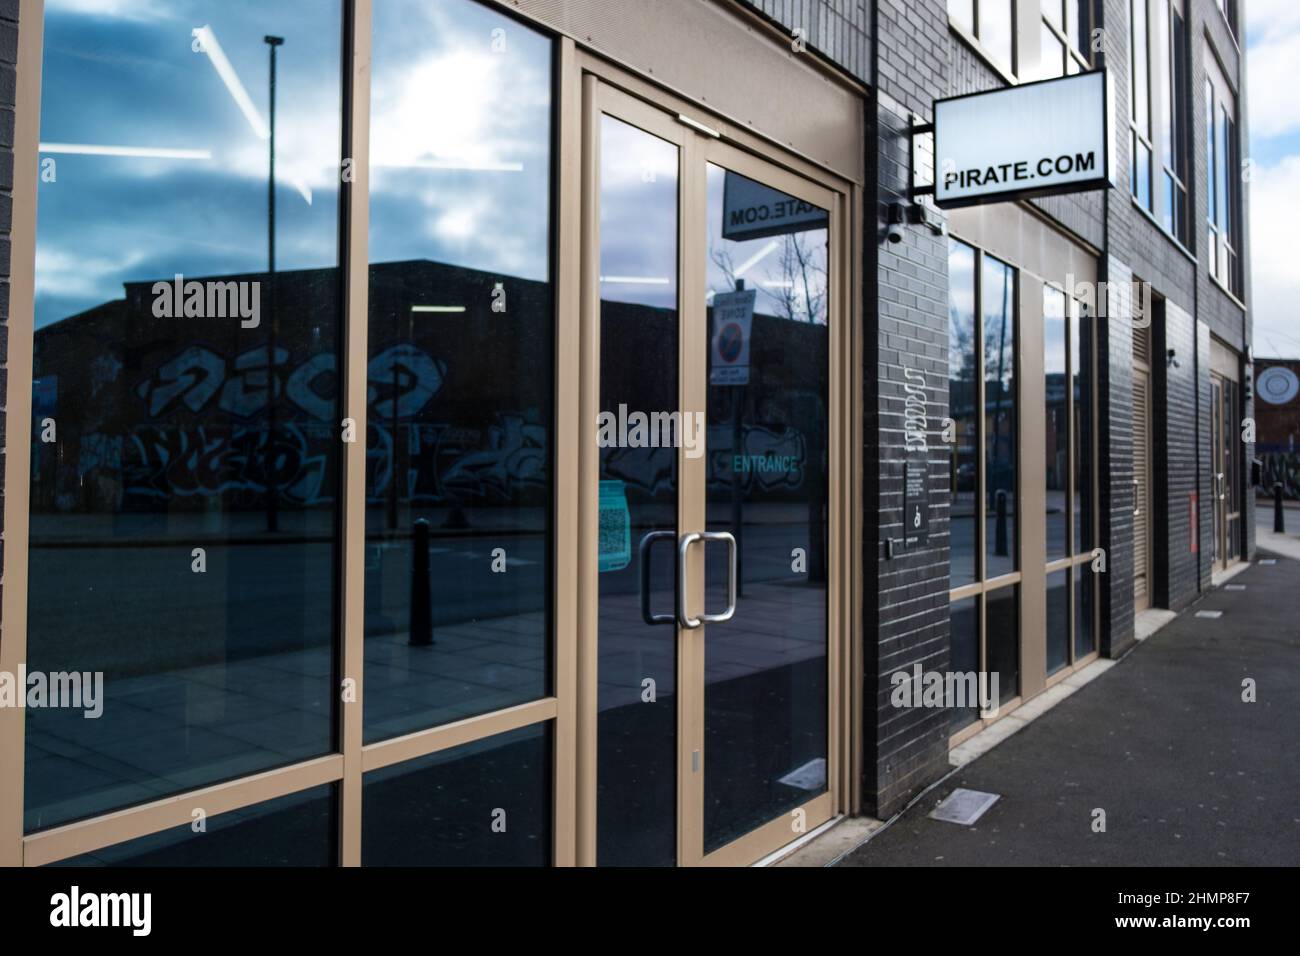 entrance to Pirate.com in Hackney Wick, providing studio space for musicians, podcasters, dancers and DJs. Stock Photo